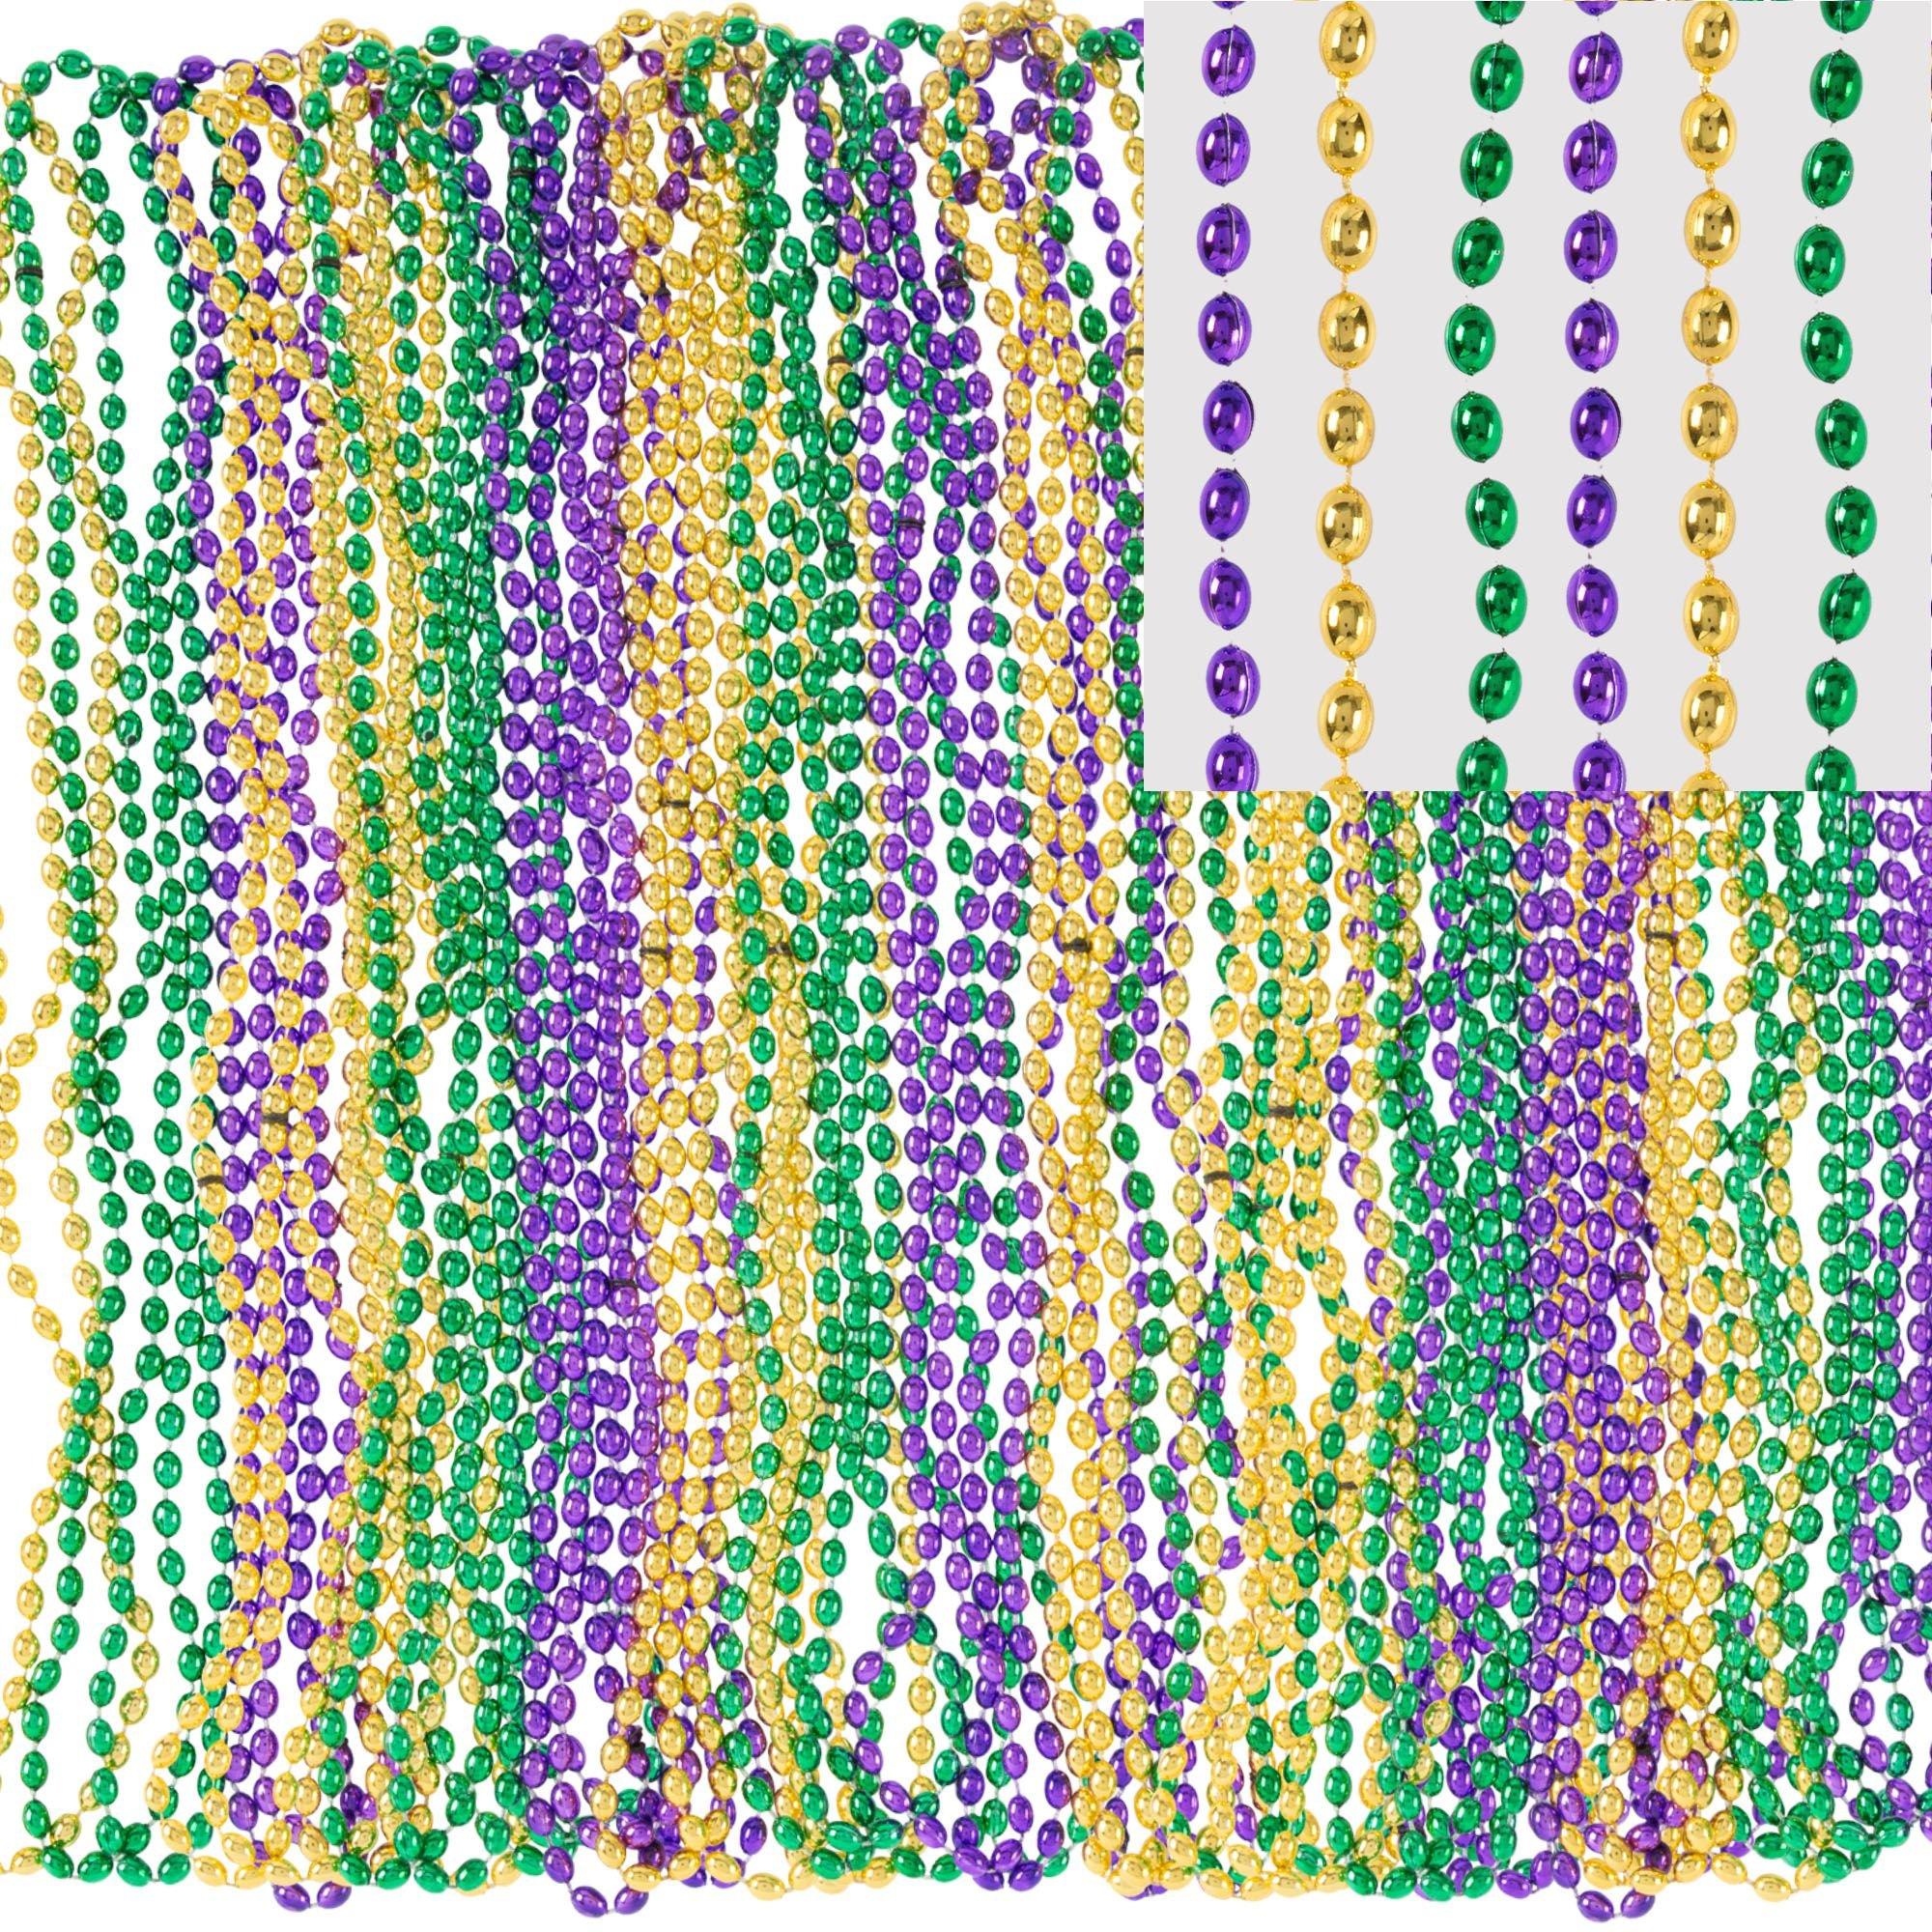 Mardi Gras Bulk Party Beads - Small Round (Pack of 720)